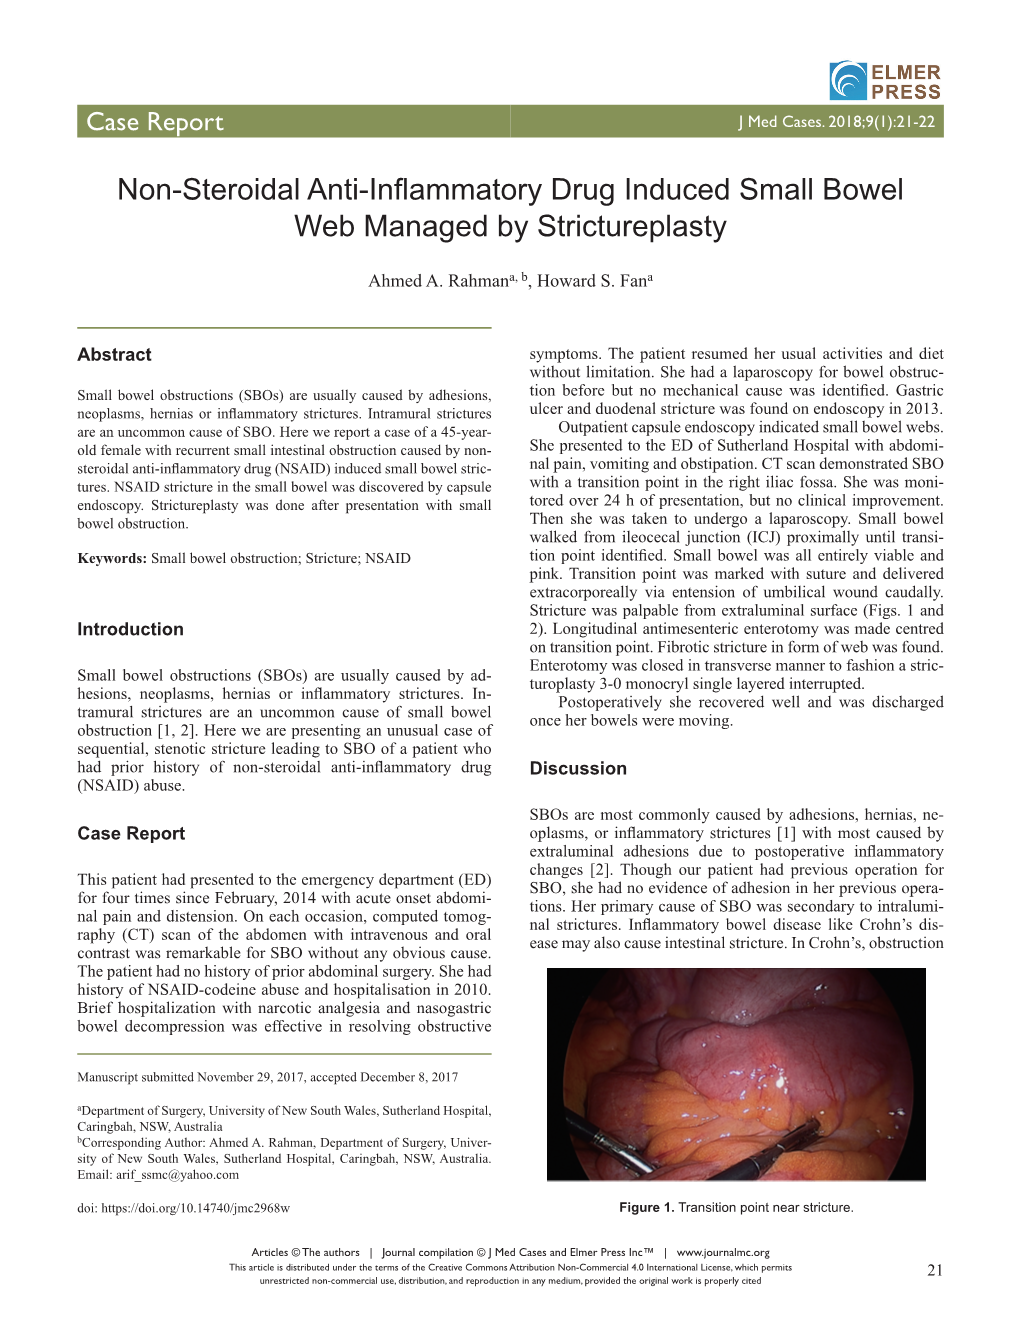 Non-Steroidal Anti-Inflammatory Drug Induced Small Bowel Web Managed by Strictureplasty